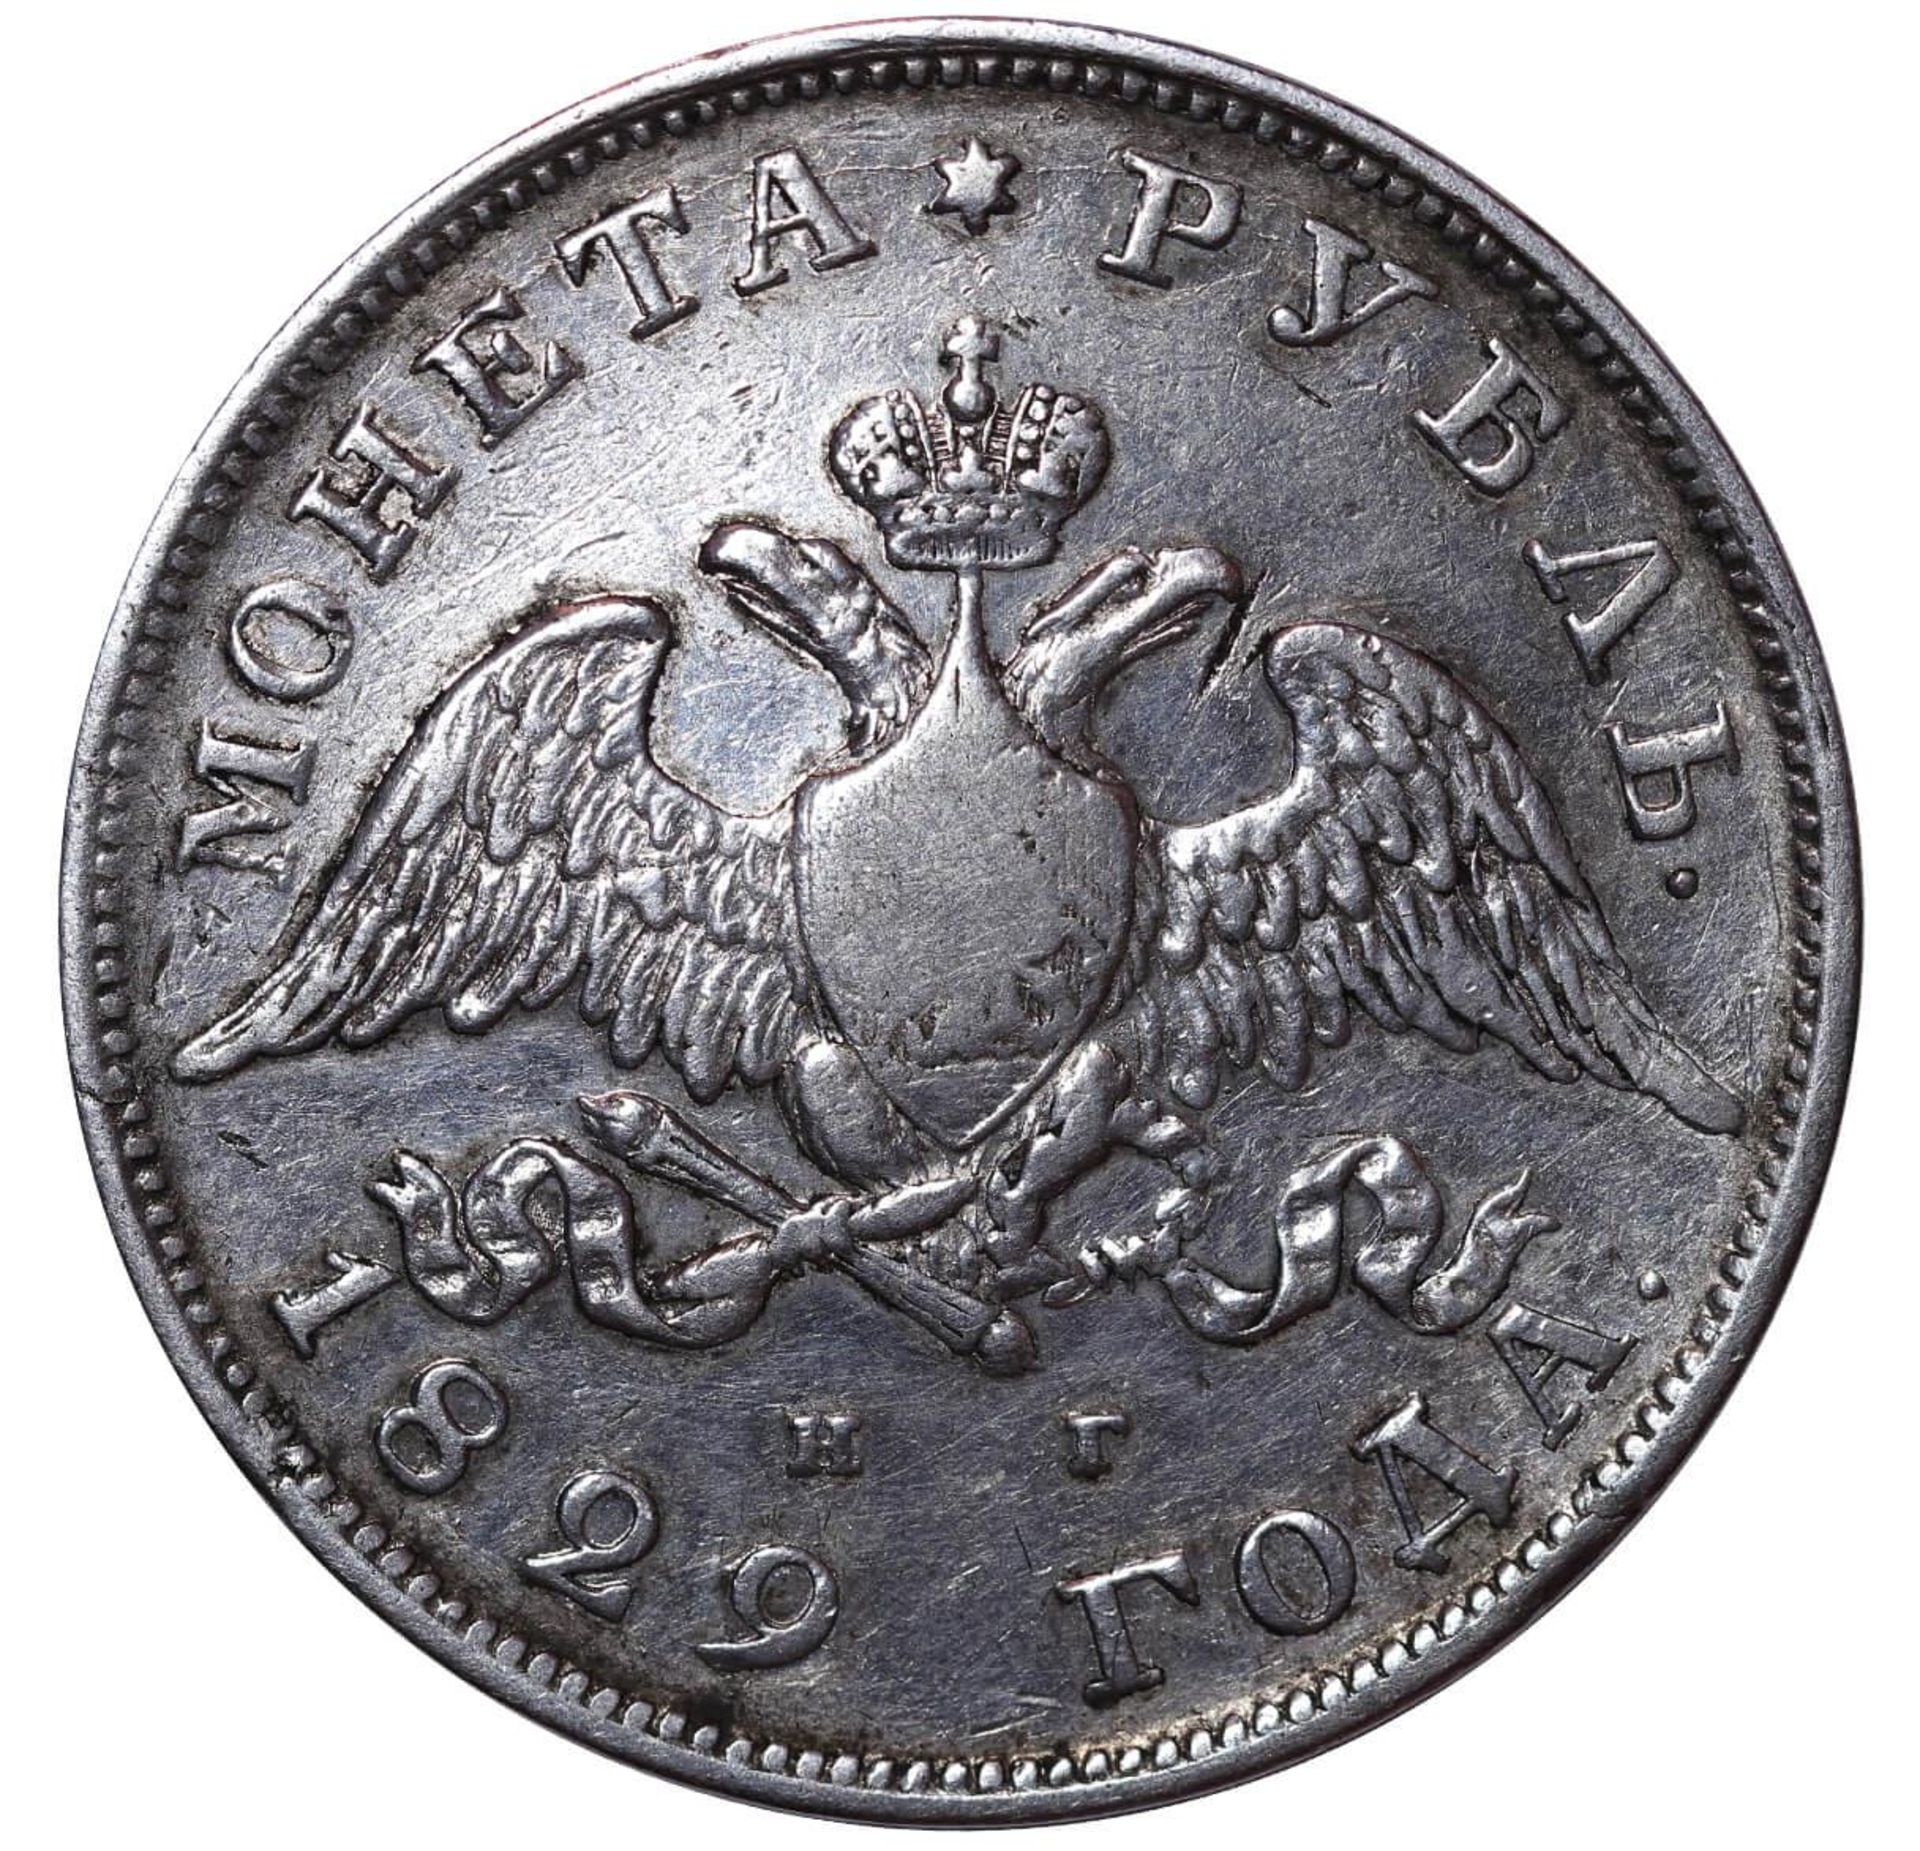 Russian Empire, 1 Rouble, 1829 year, SPB-NG - Image 3 of 3